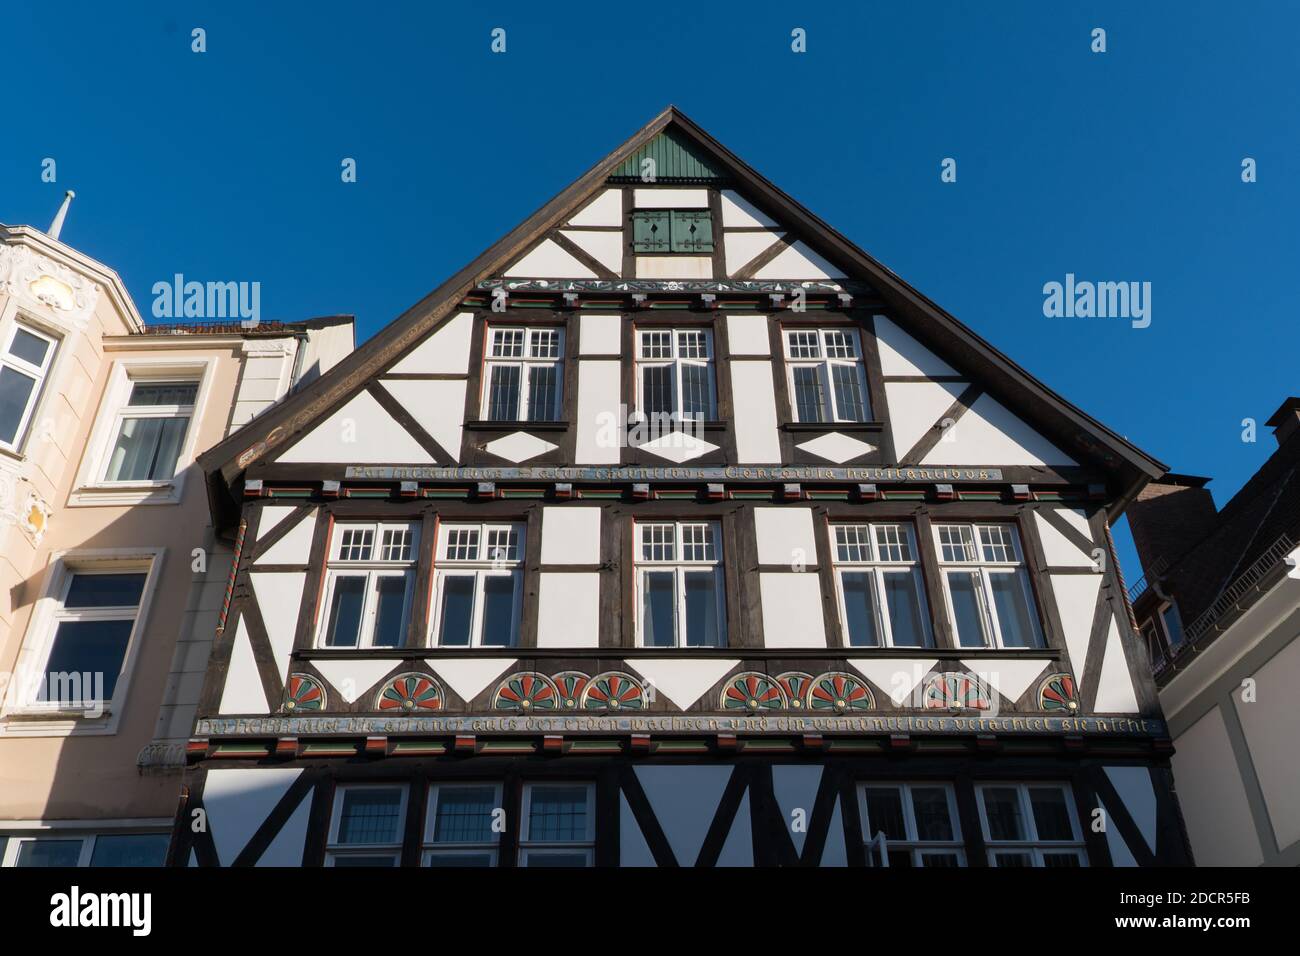 Half-timbered houses in the city of Detmold, Germany Stock Photo